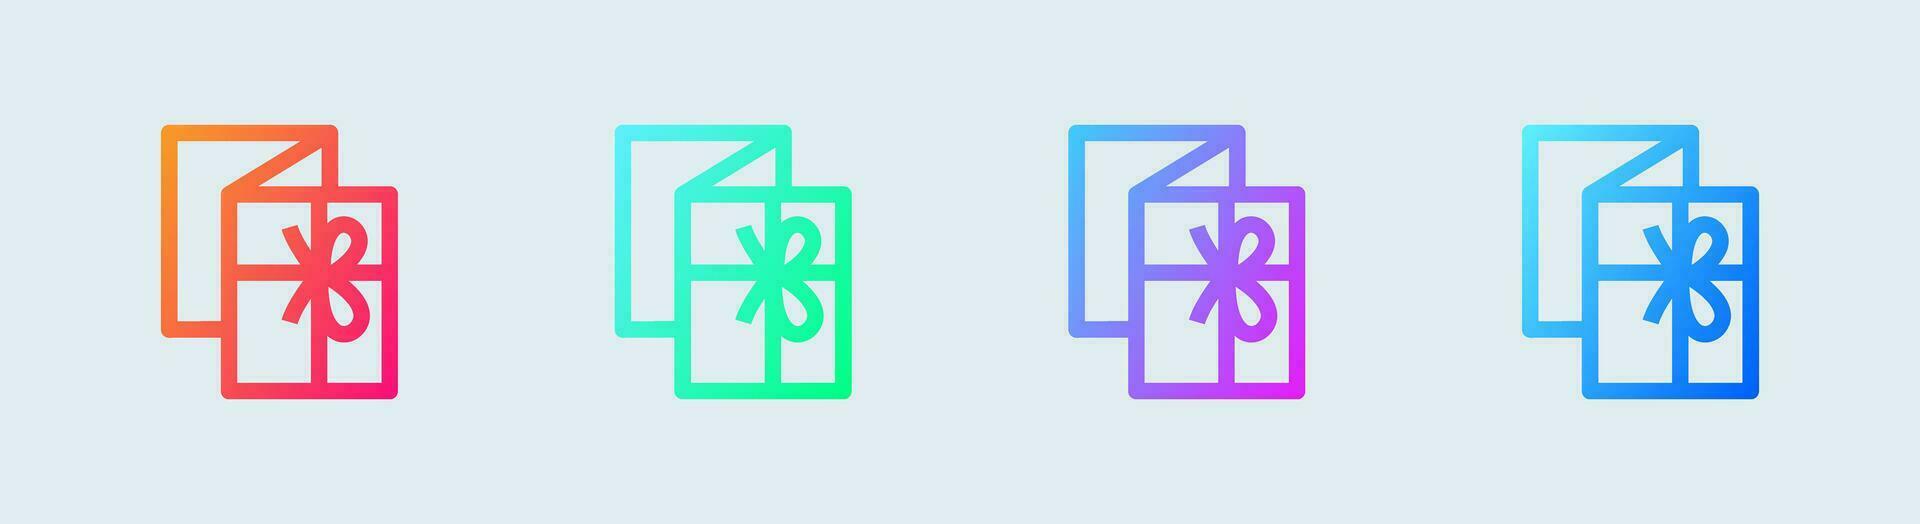 Gift line icon in gradient colors. Surprise signs vector illustration.